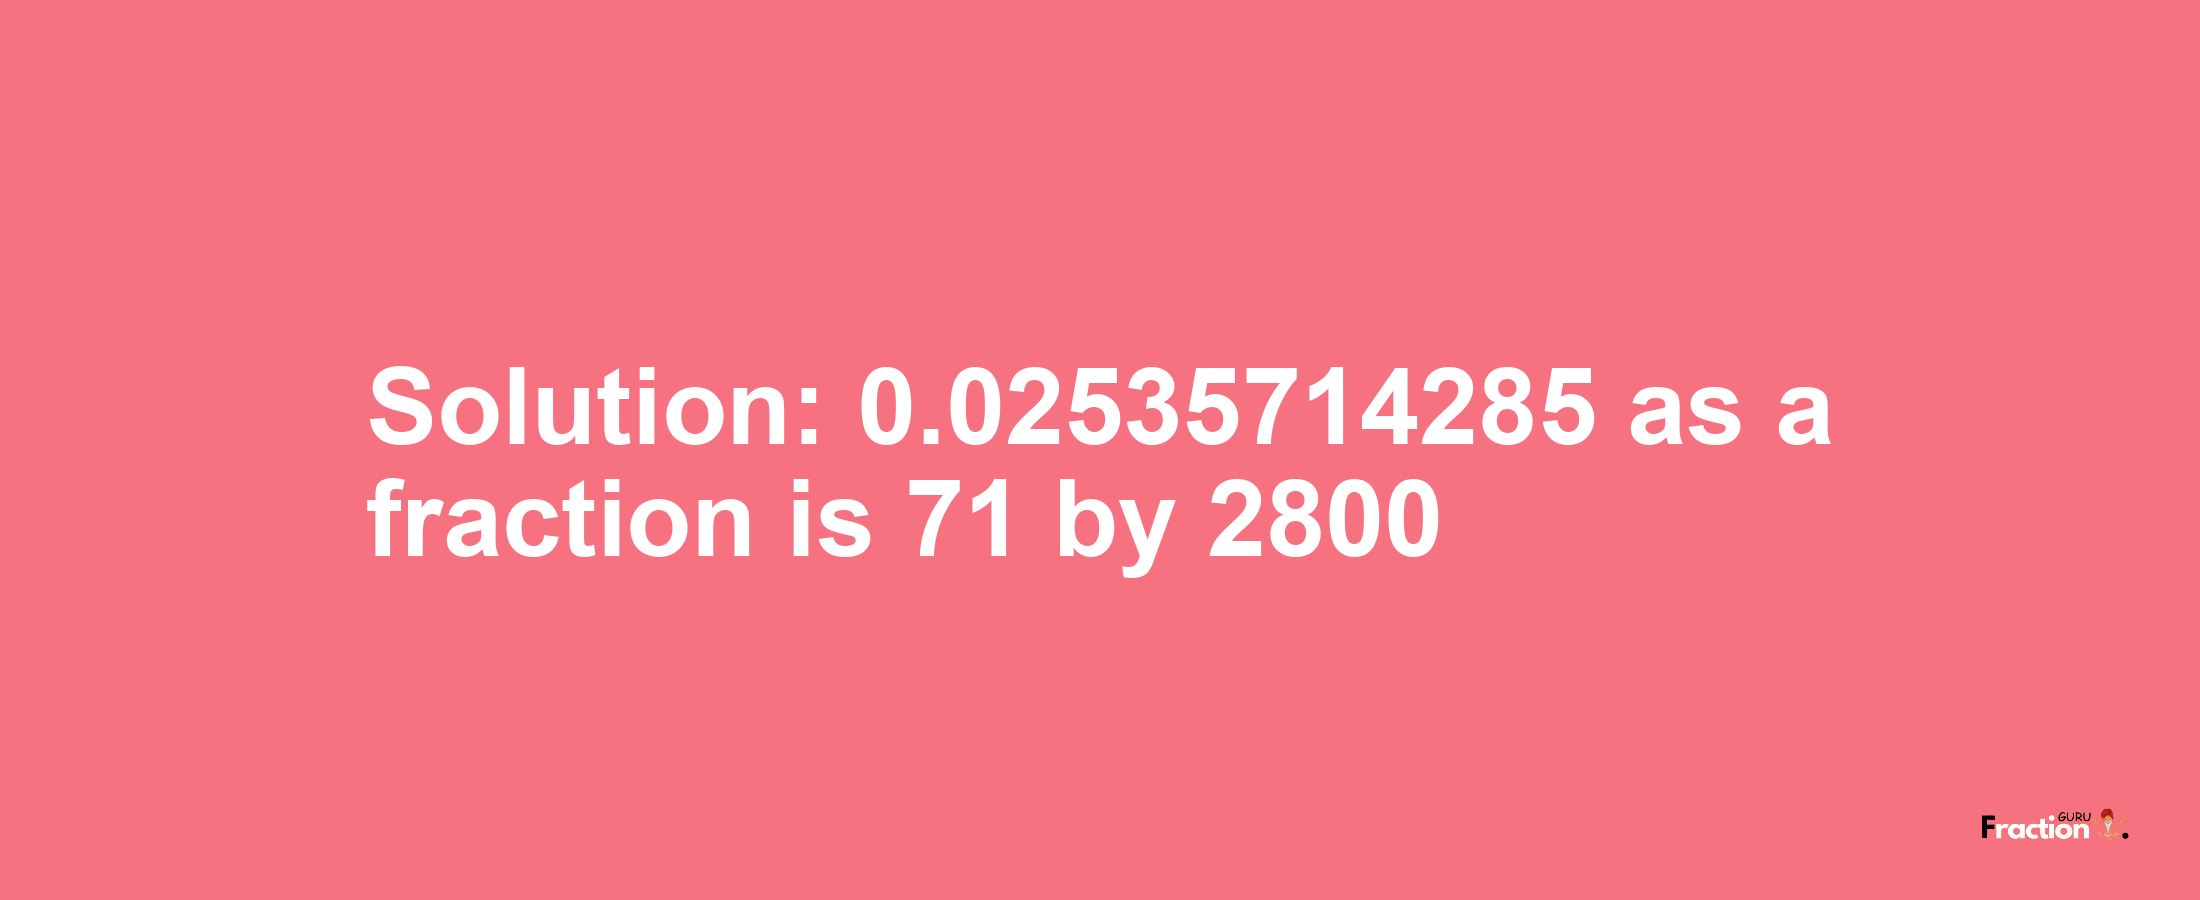 Solution:0.02535714285 as a fraction is 71/2800